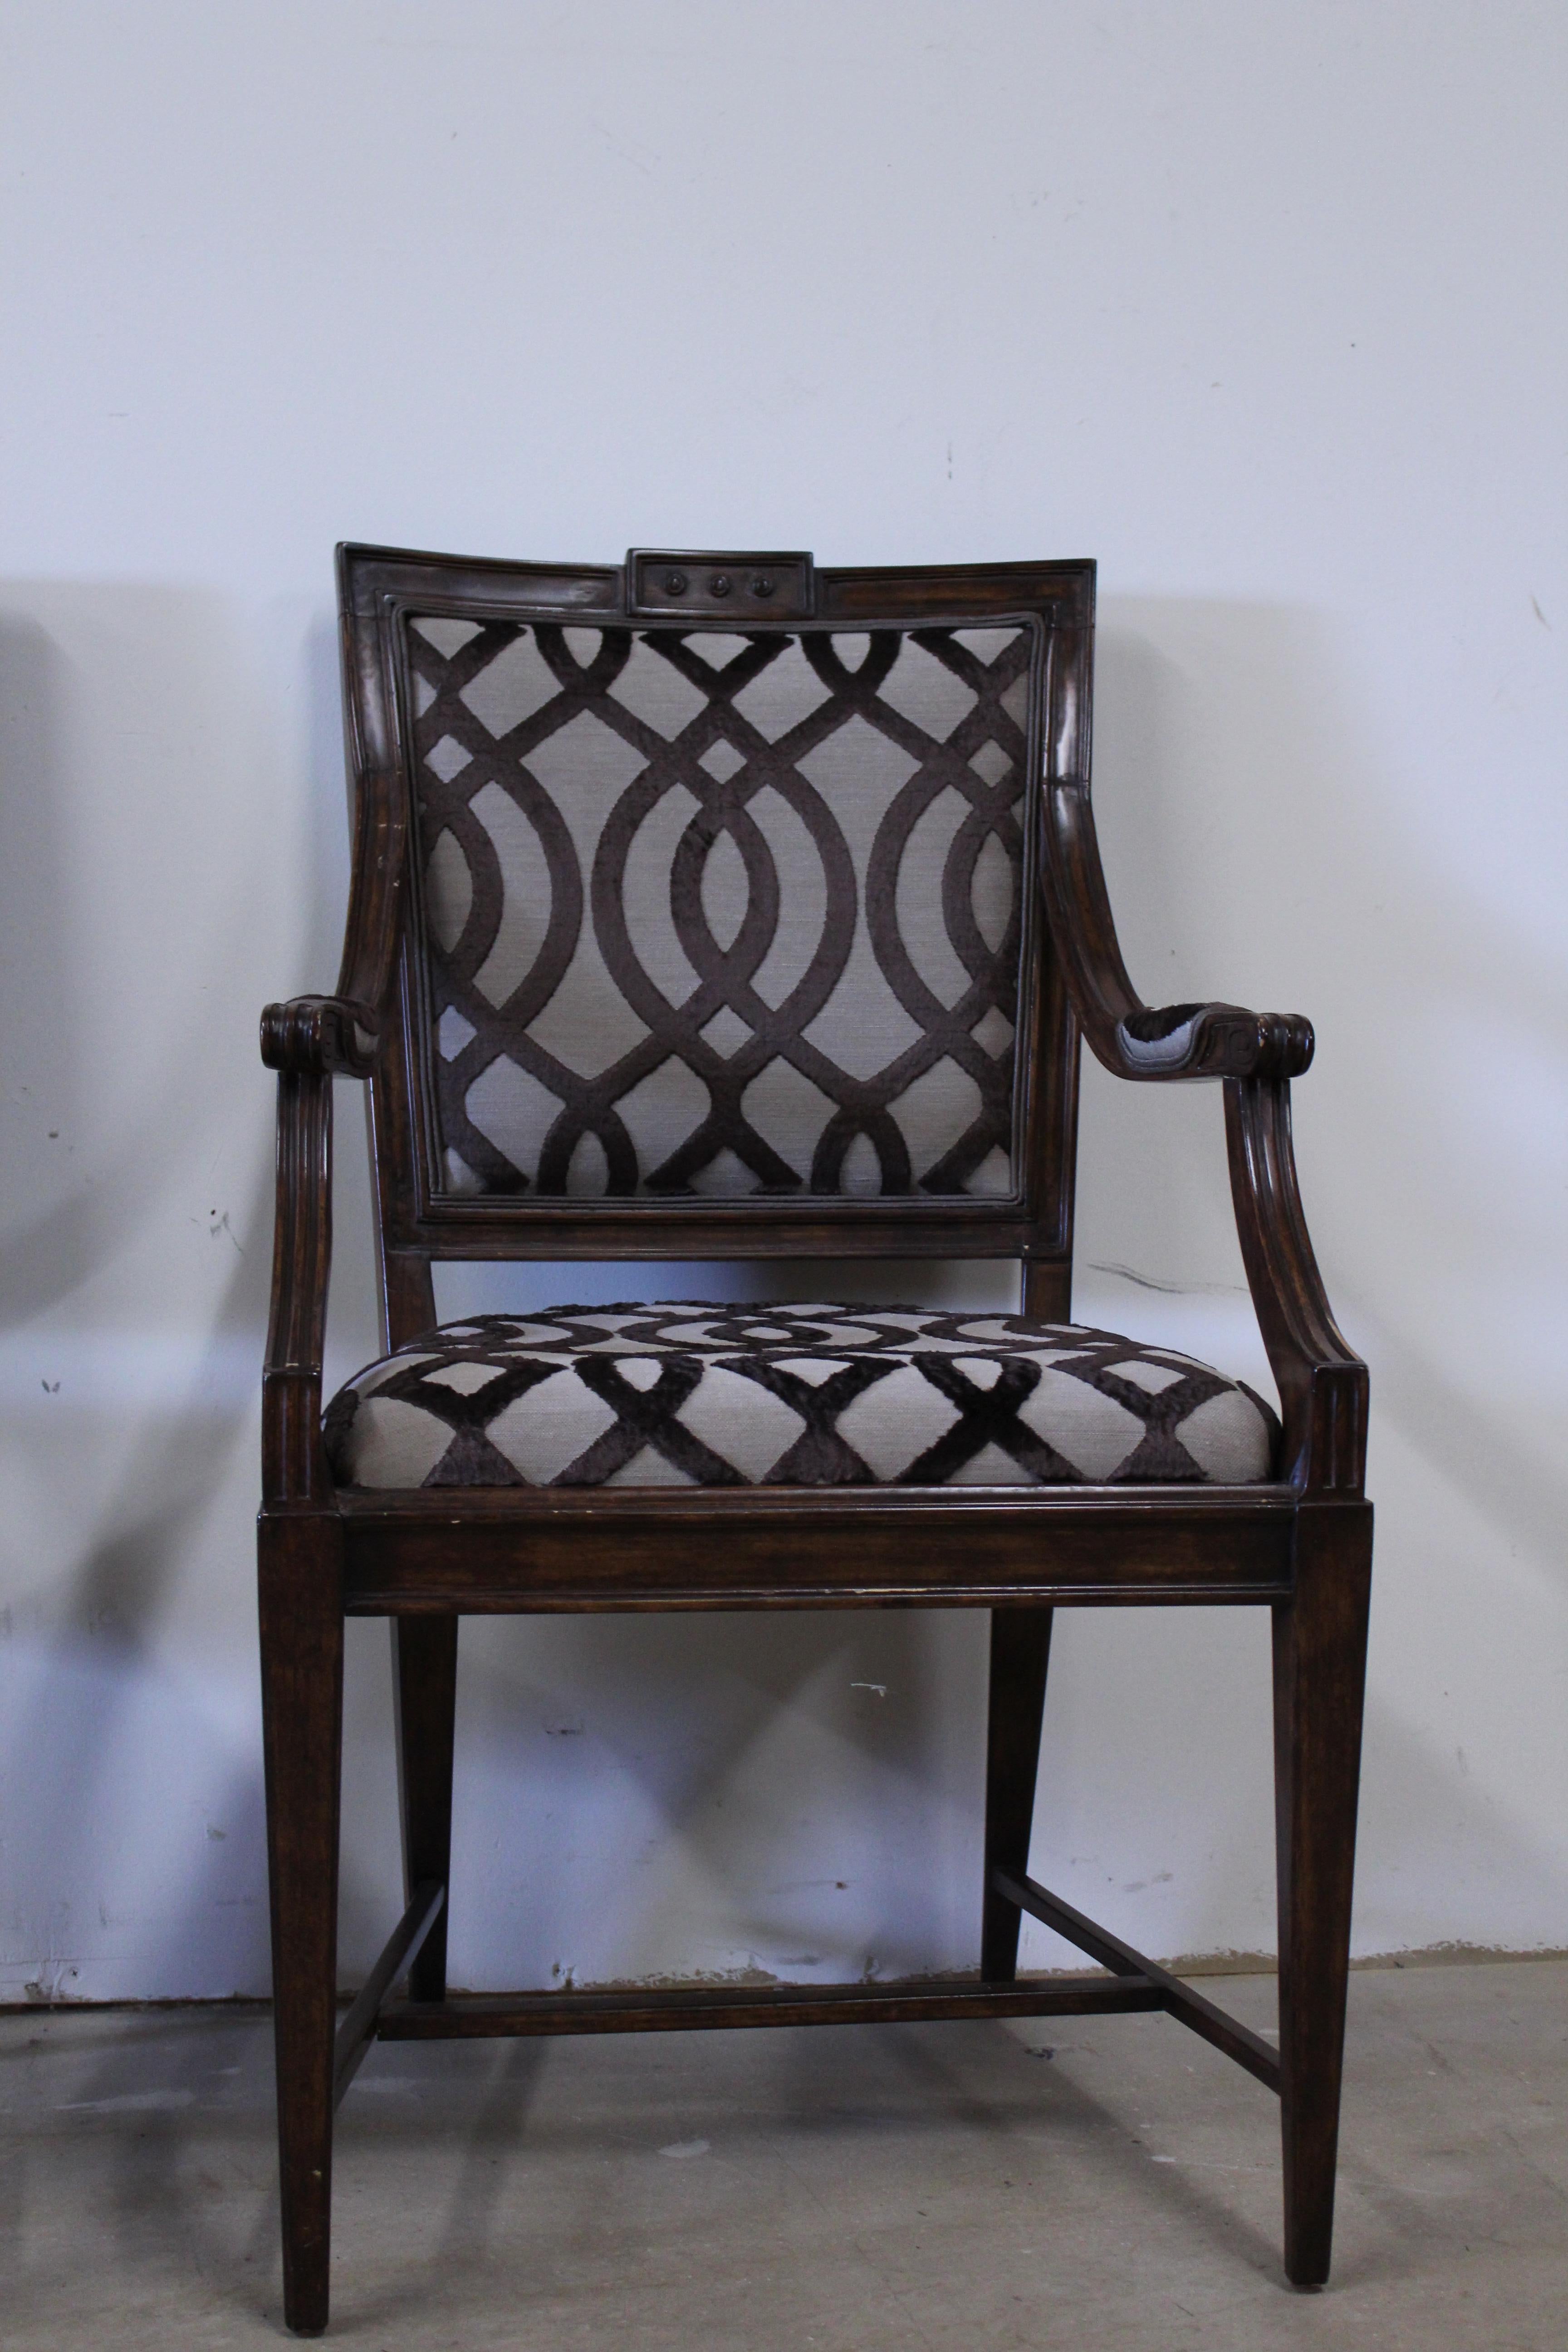 Pollack dining chairs set of 6, 4 arm chairs, 2 side chairs, walnut finish, mismatched upholstery.